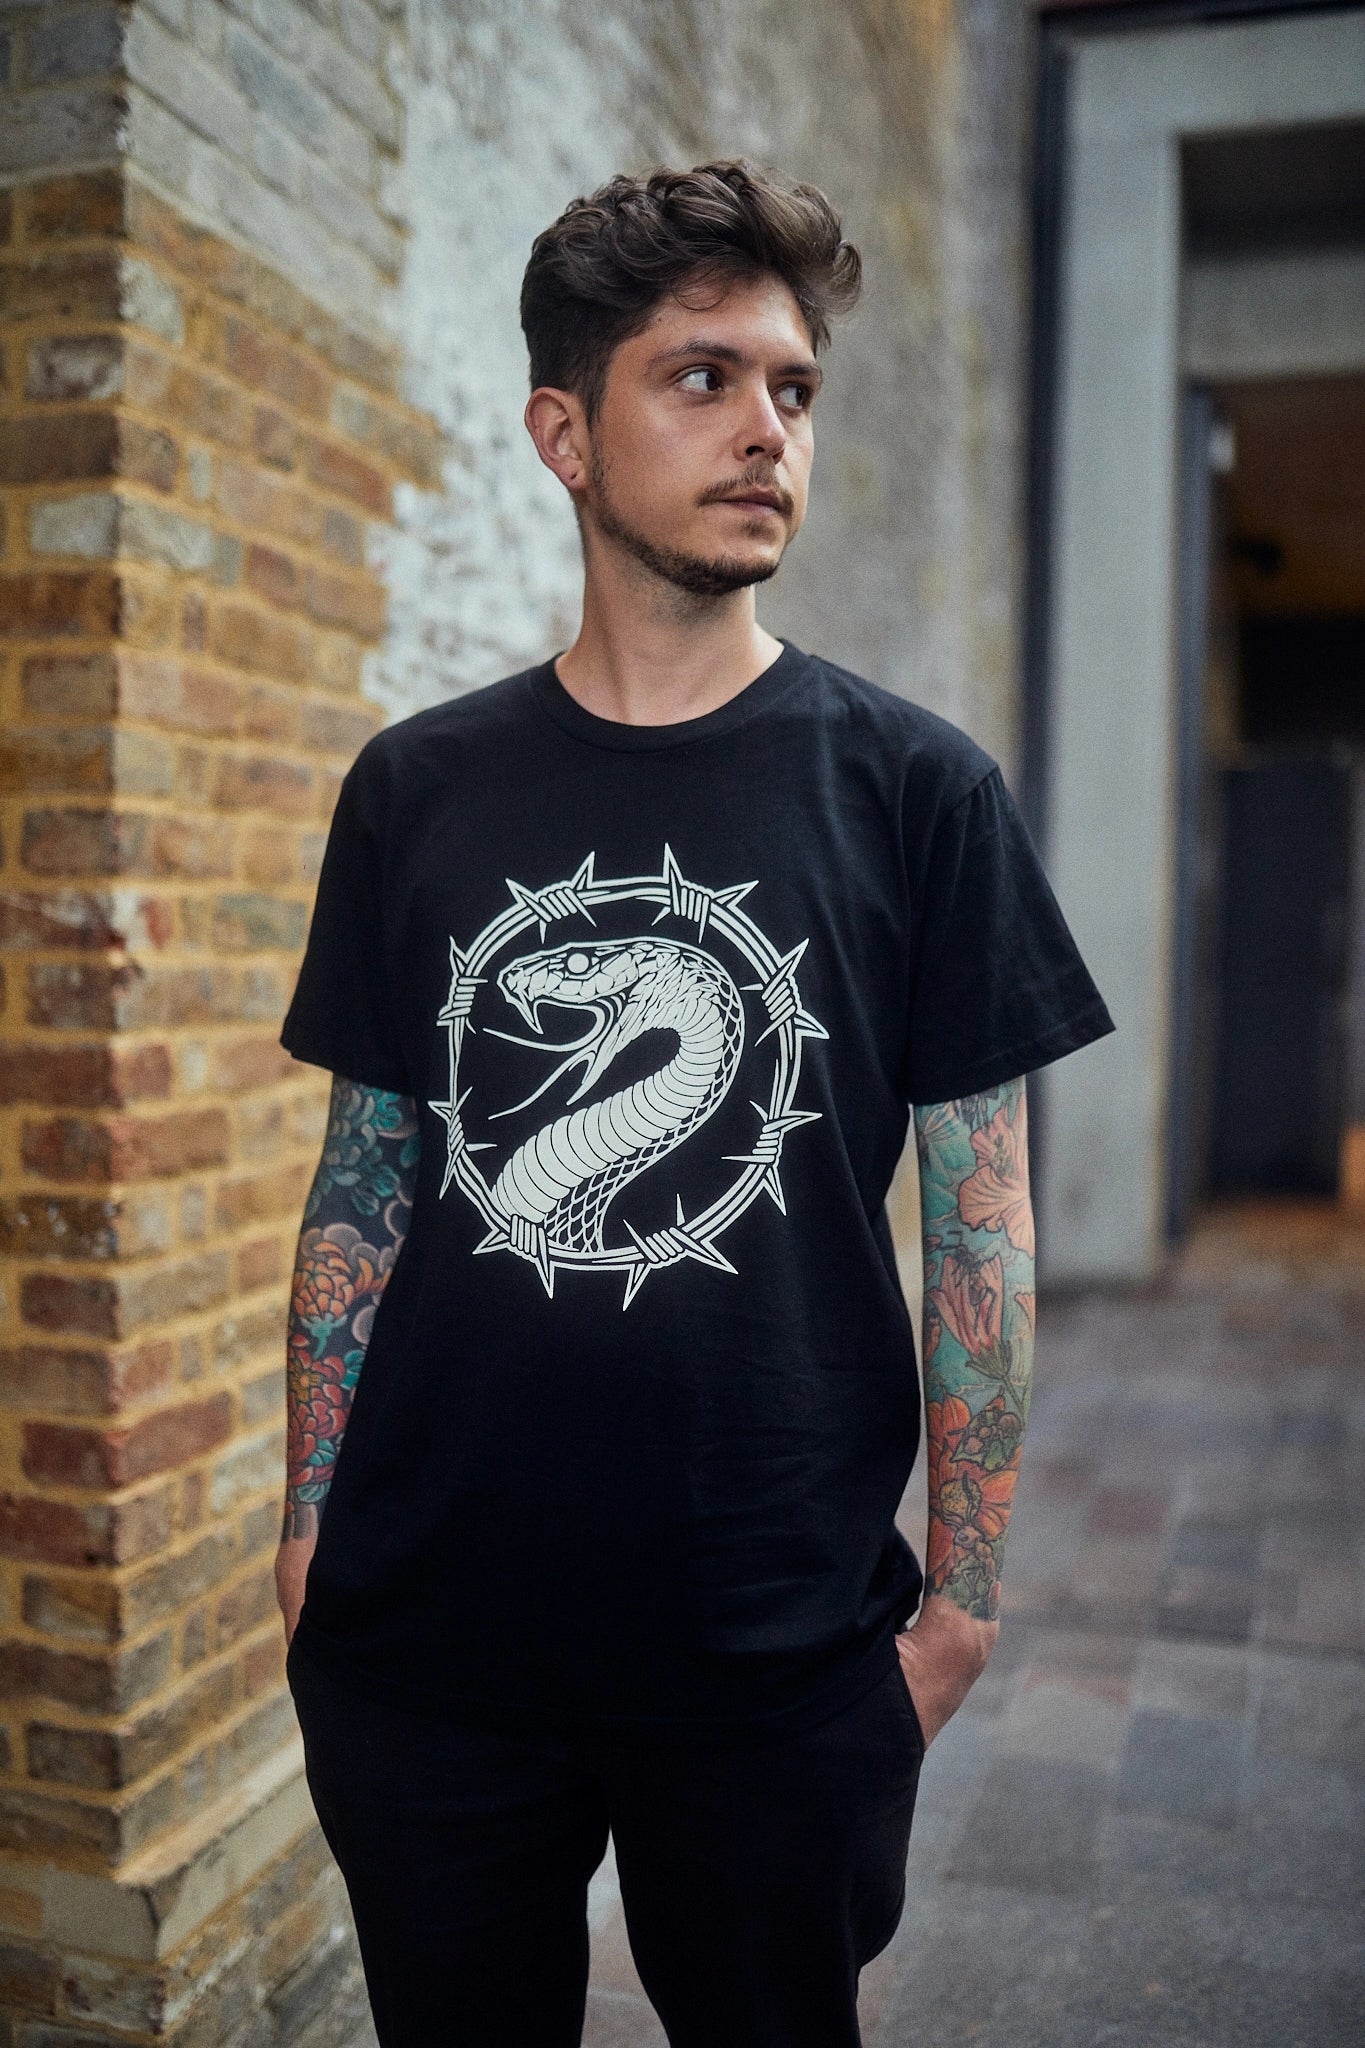 Barber wire snake t shirt by Joao Bosco